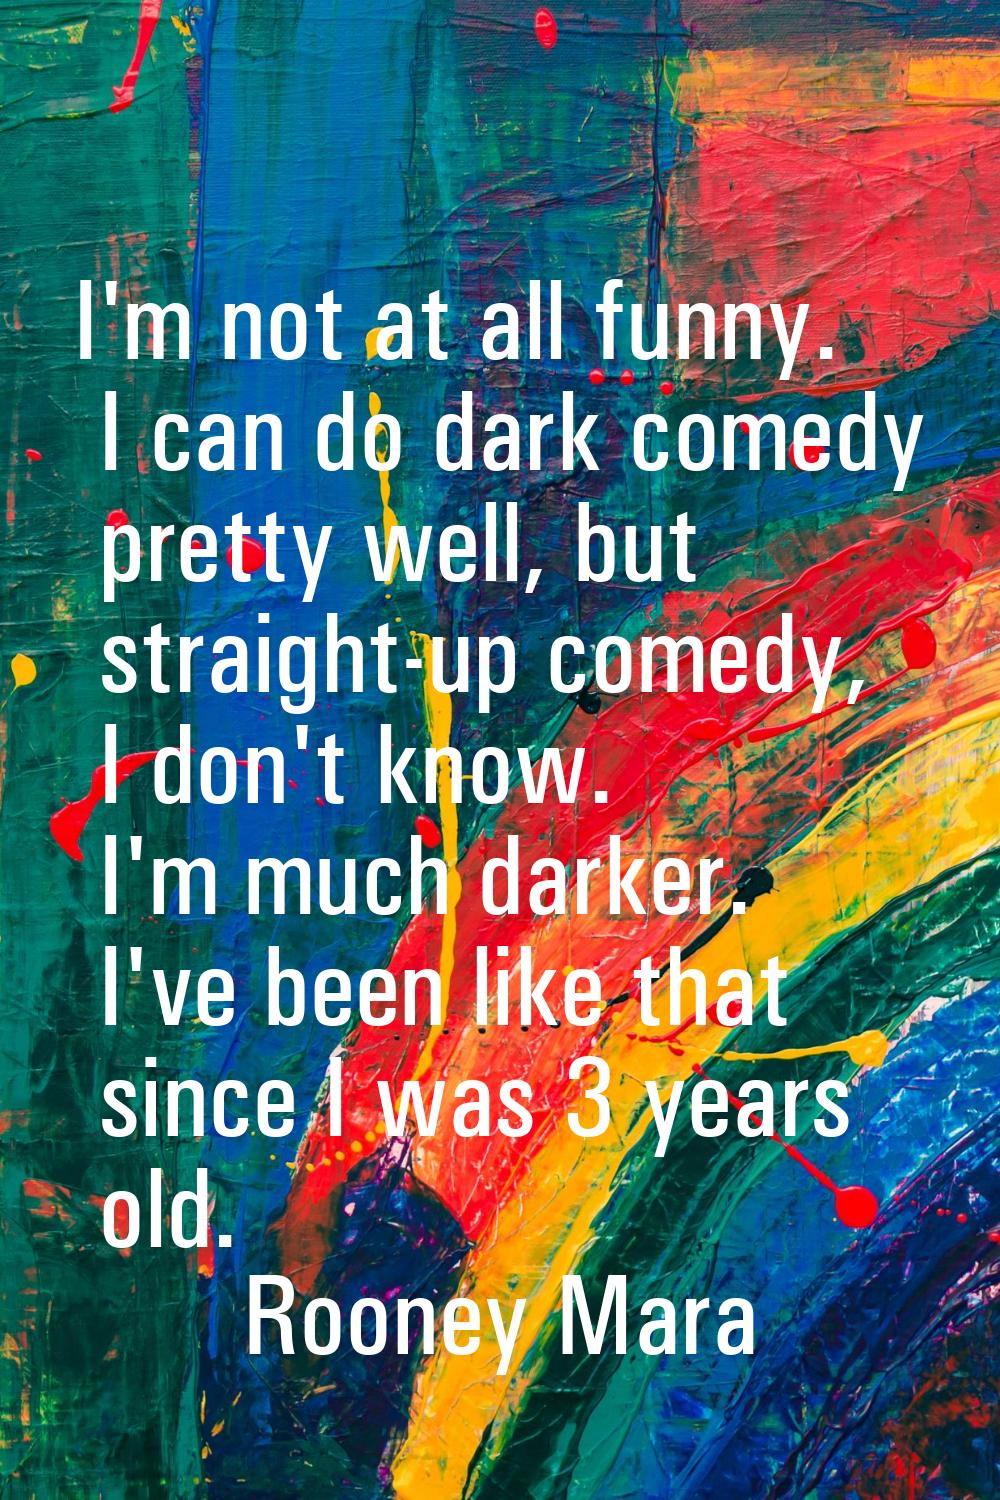 I'm not at all funny. I can do dark comedy pretty well, but straight-up comedy, I don't know. I'm m